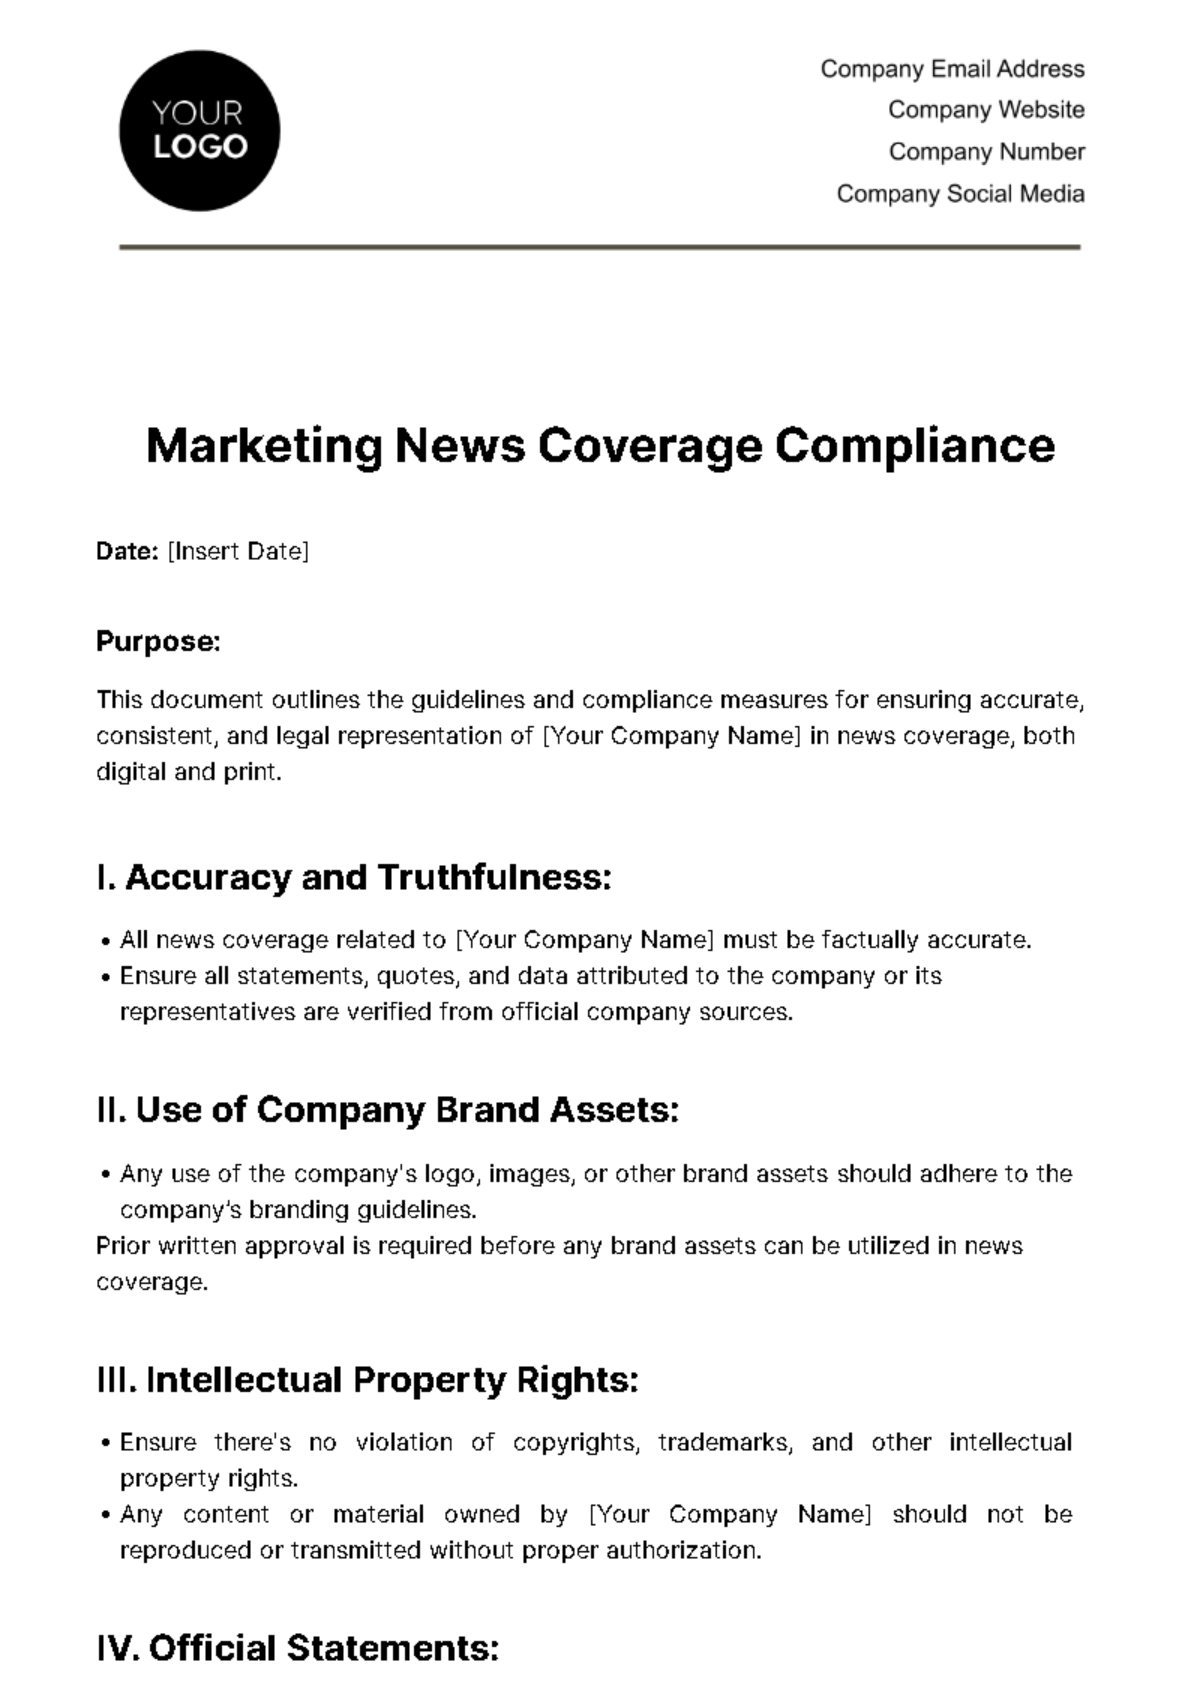 Free Marketing News Coverage Compliance Template